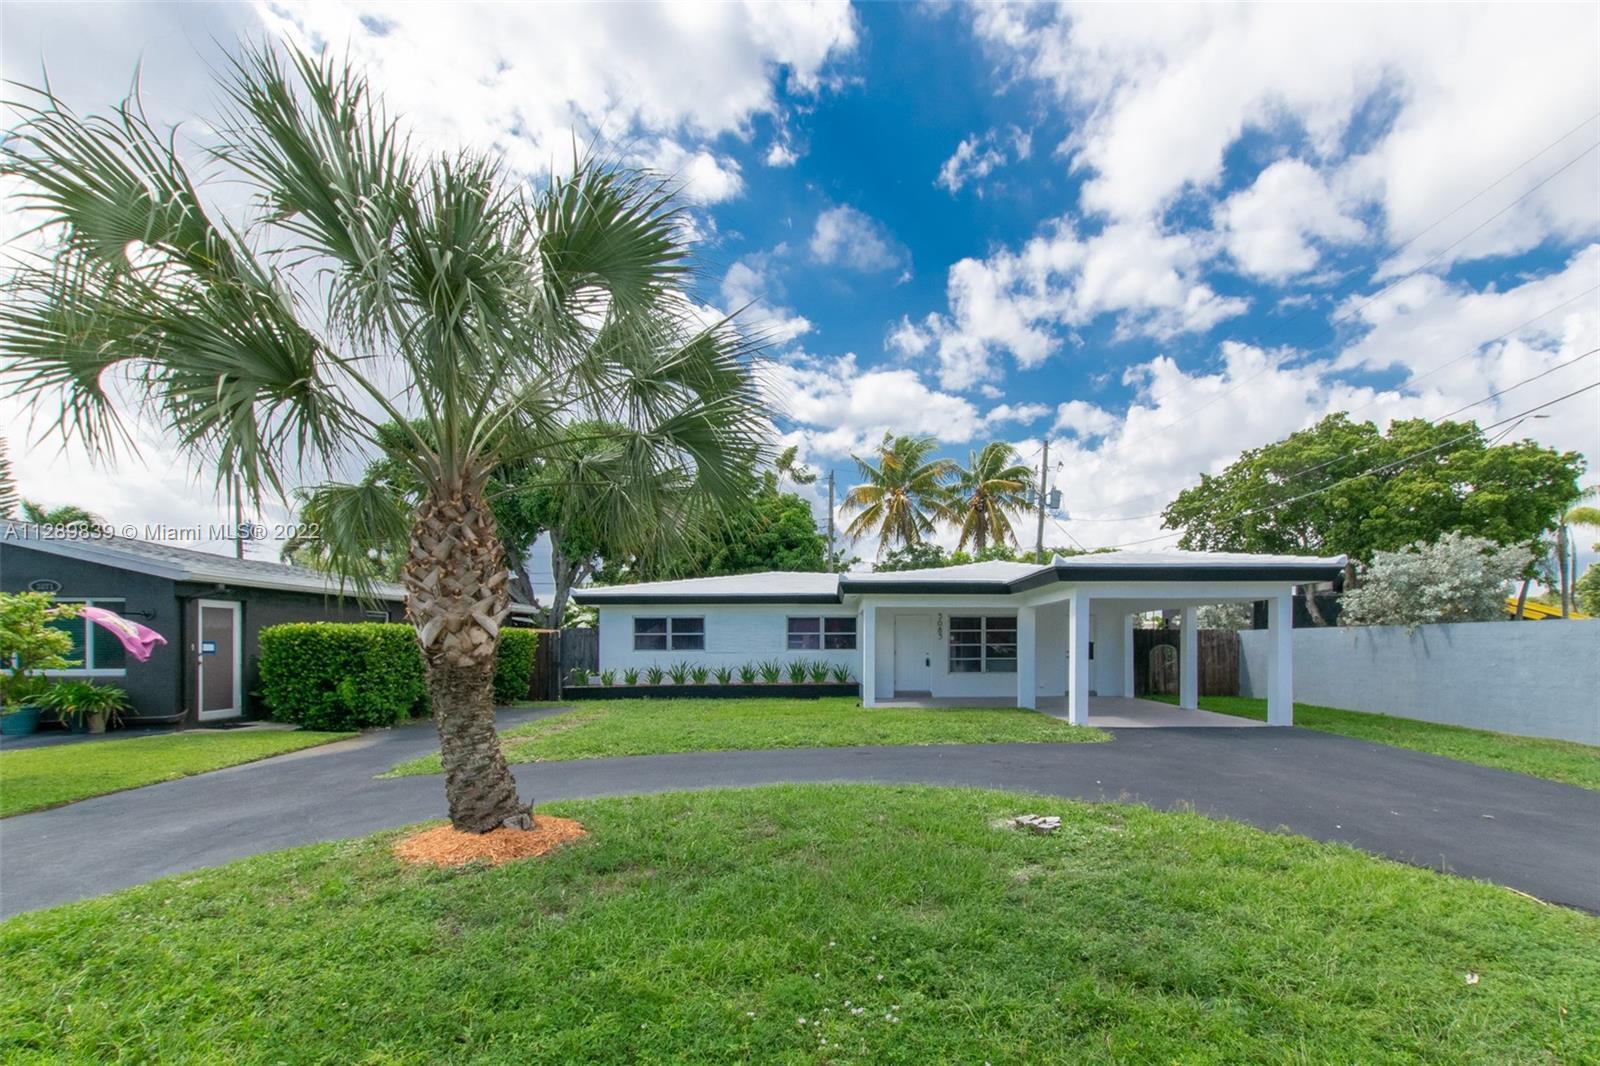 Beautifully maintained 3 bedroom, 2 bathroom single family home in Wilton Manors, just needs new own